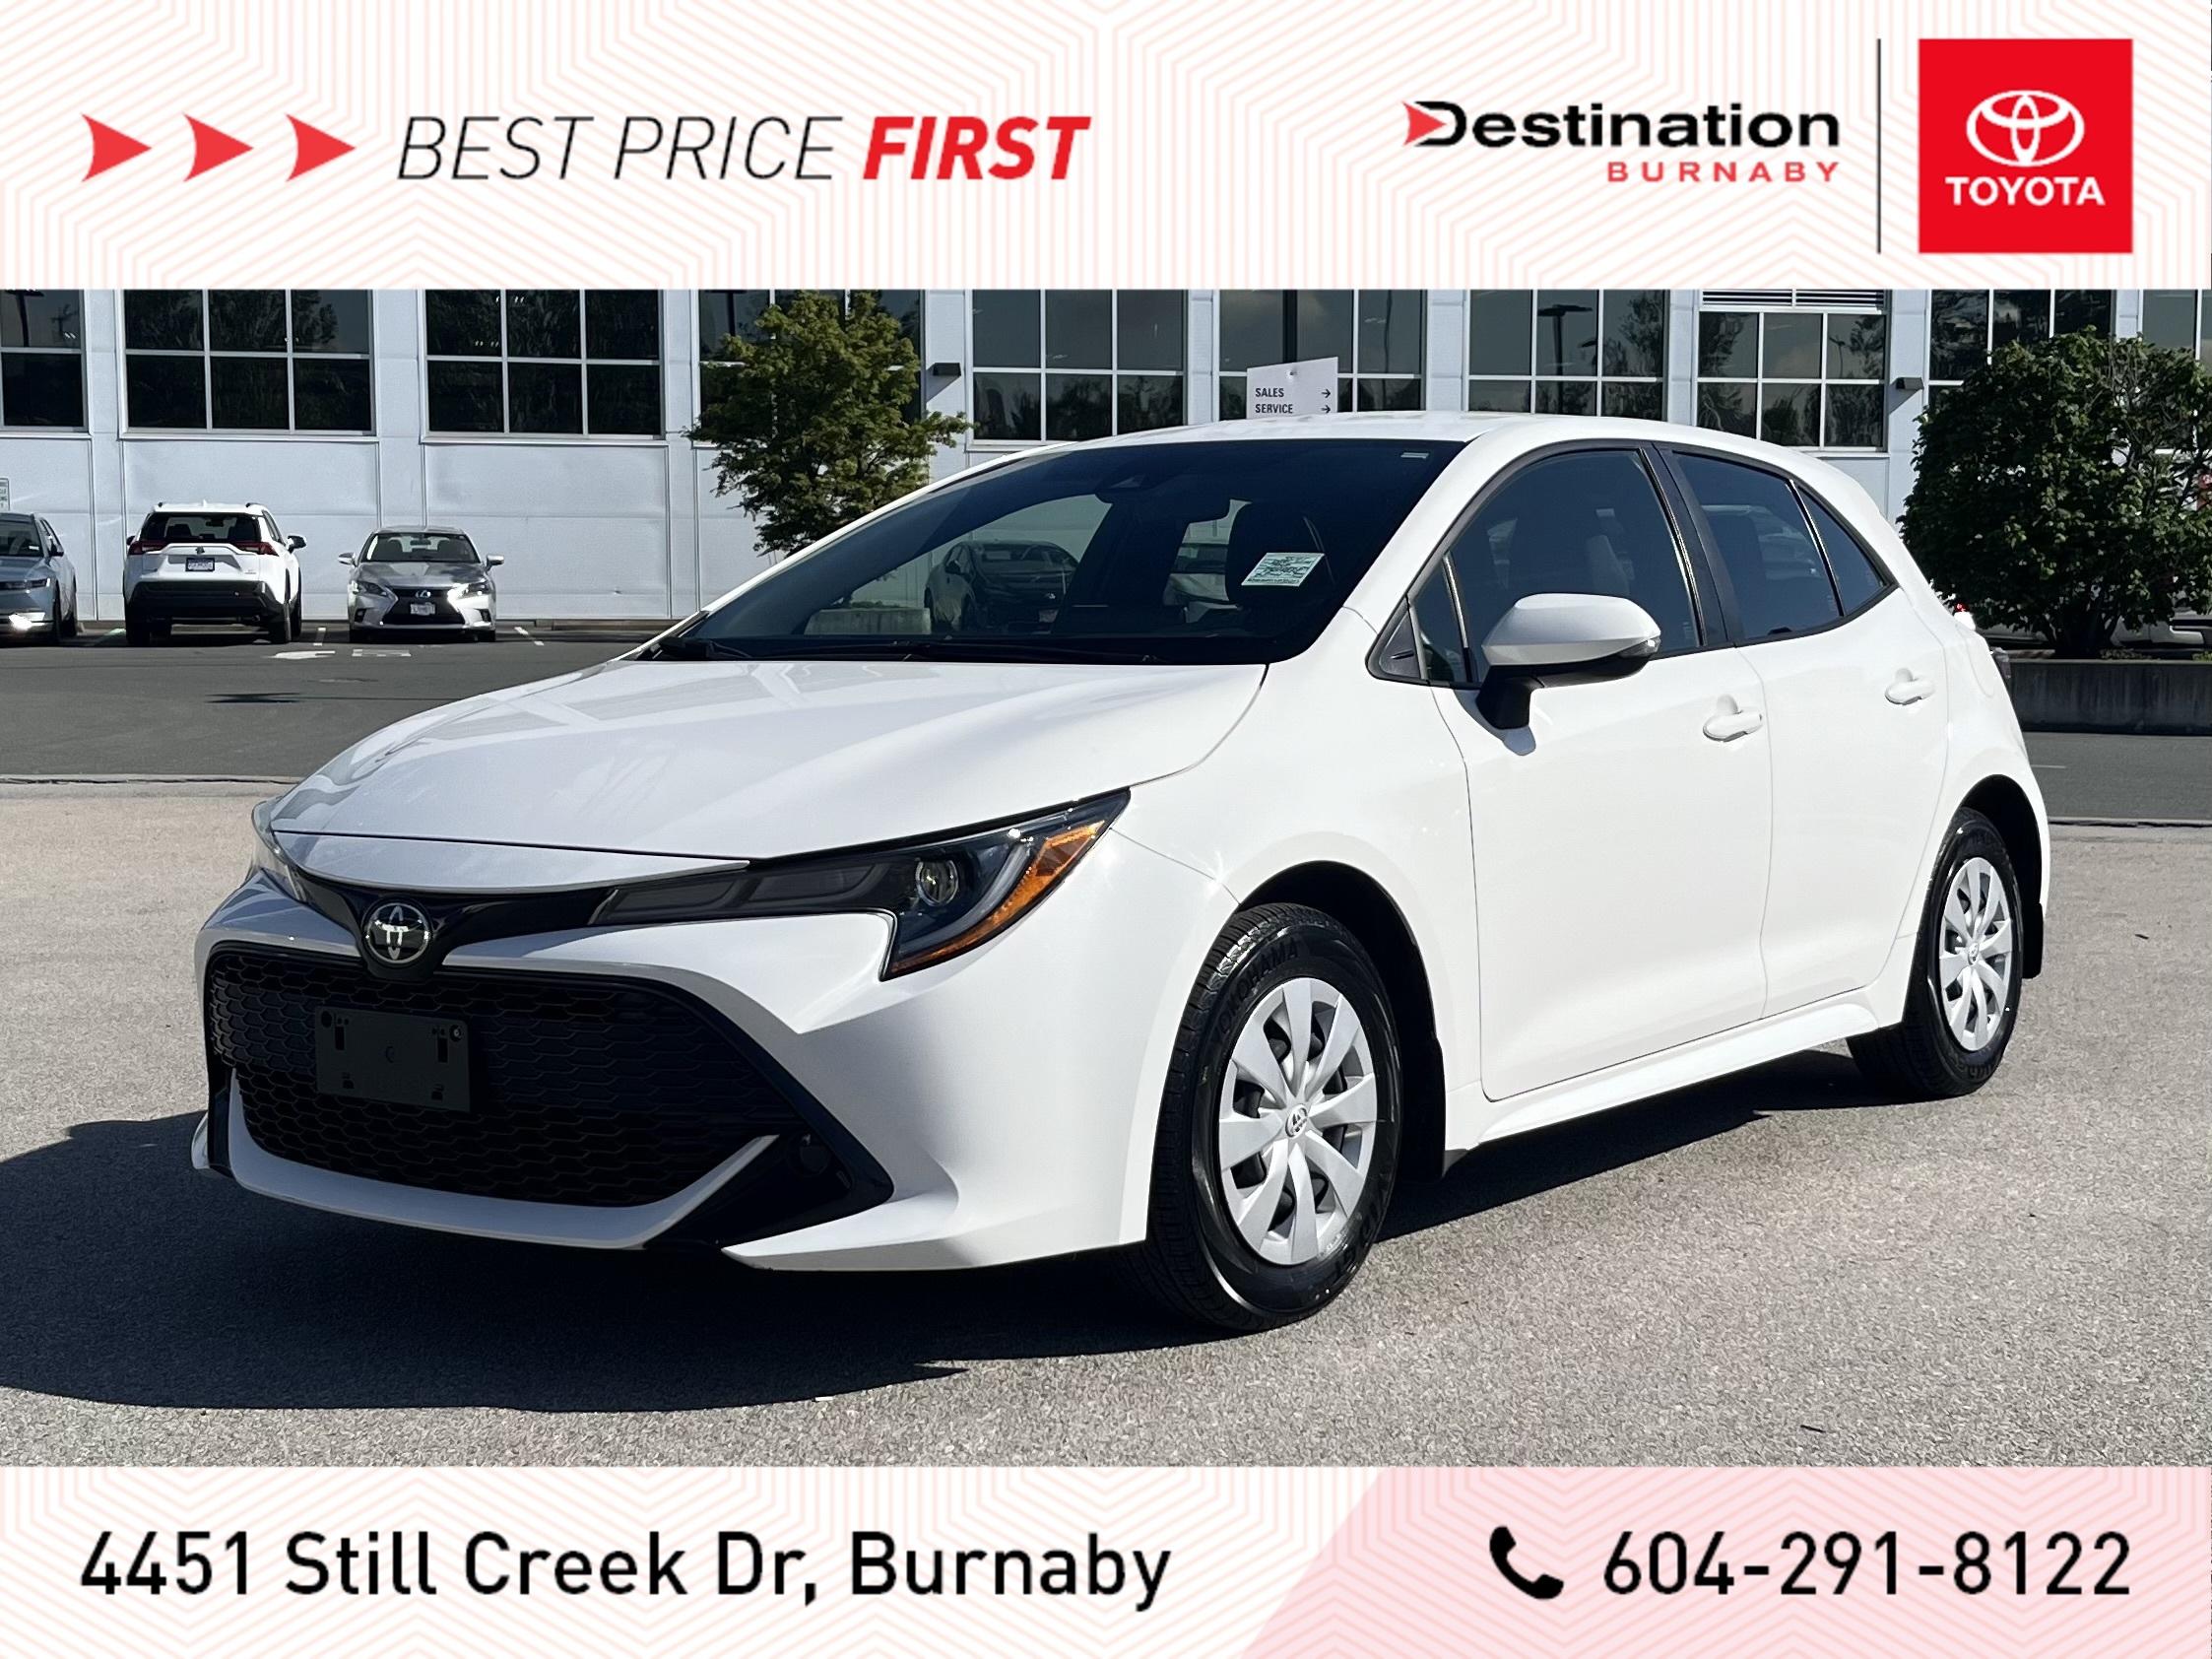 2019 Toyota Corolla 6-speed, Low Kms, No accidents